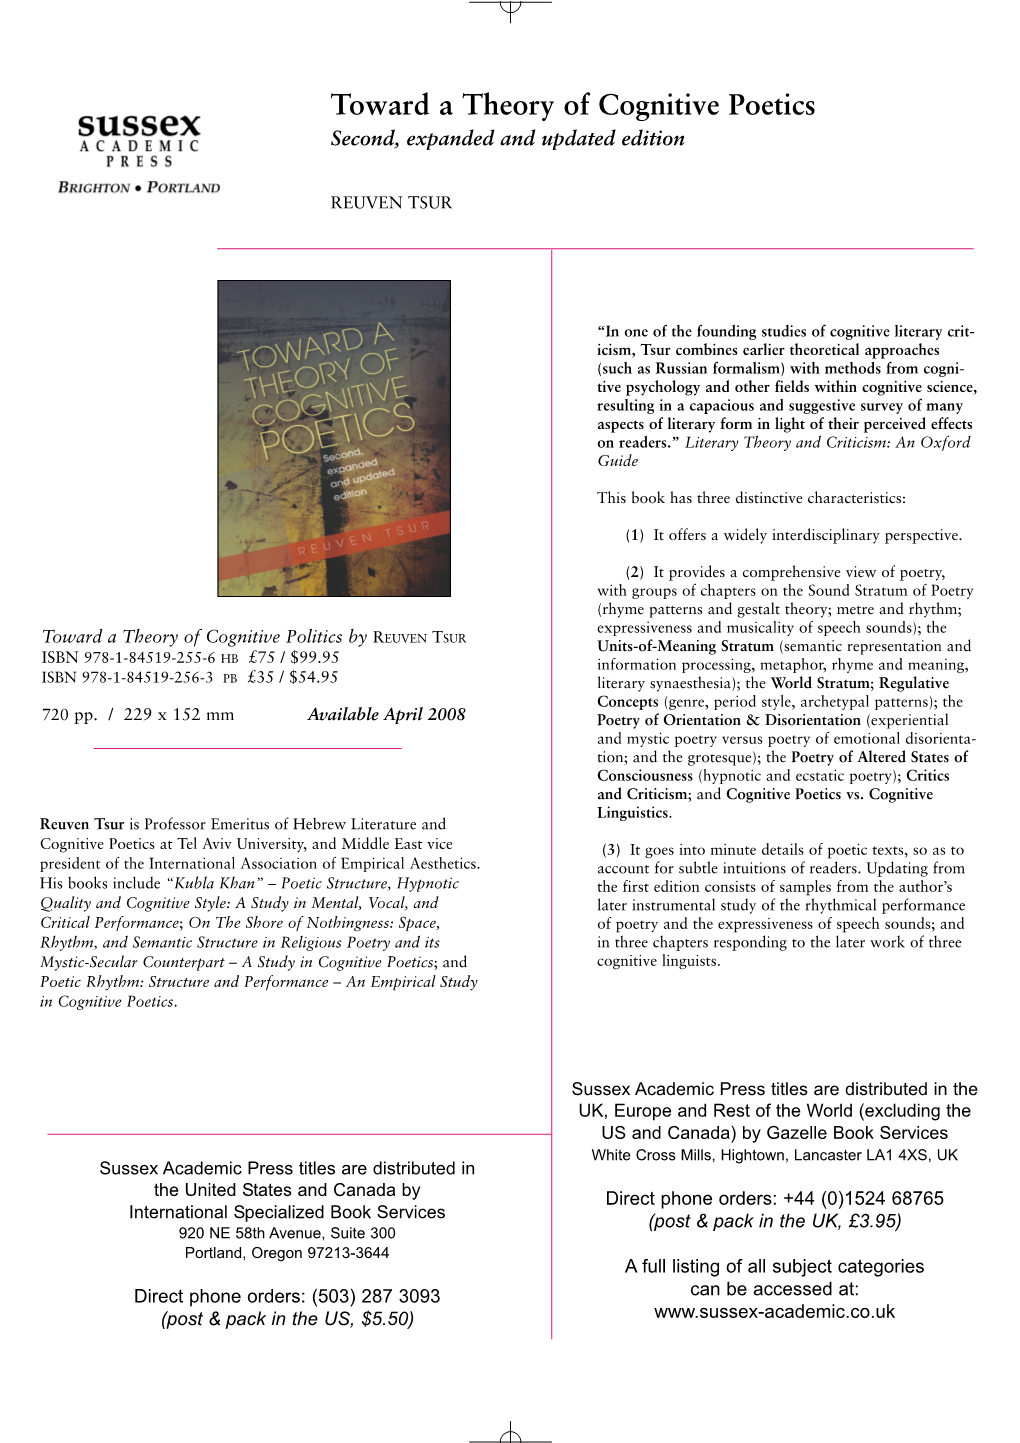 Toward a Theory of Cognitive Poetics Second, Expanded and Updated Edition